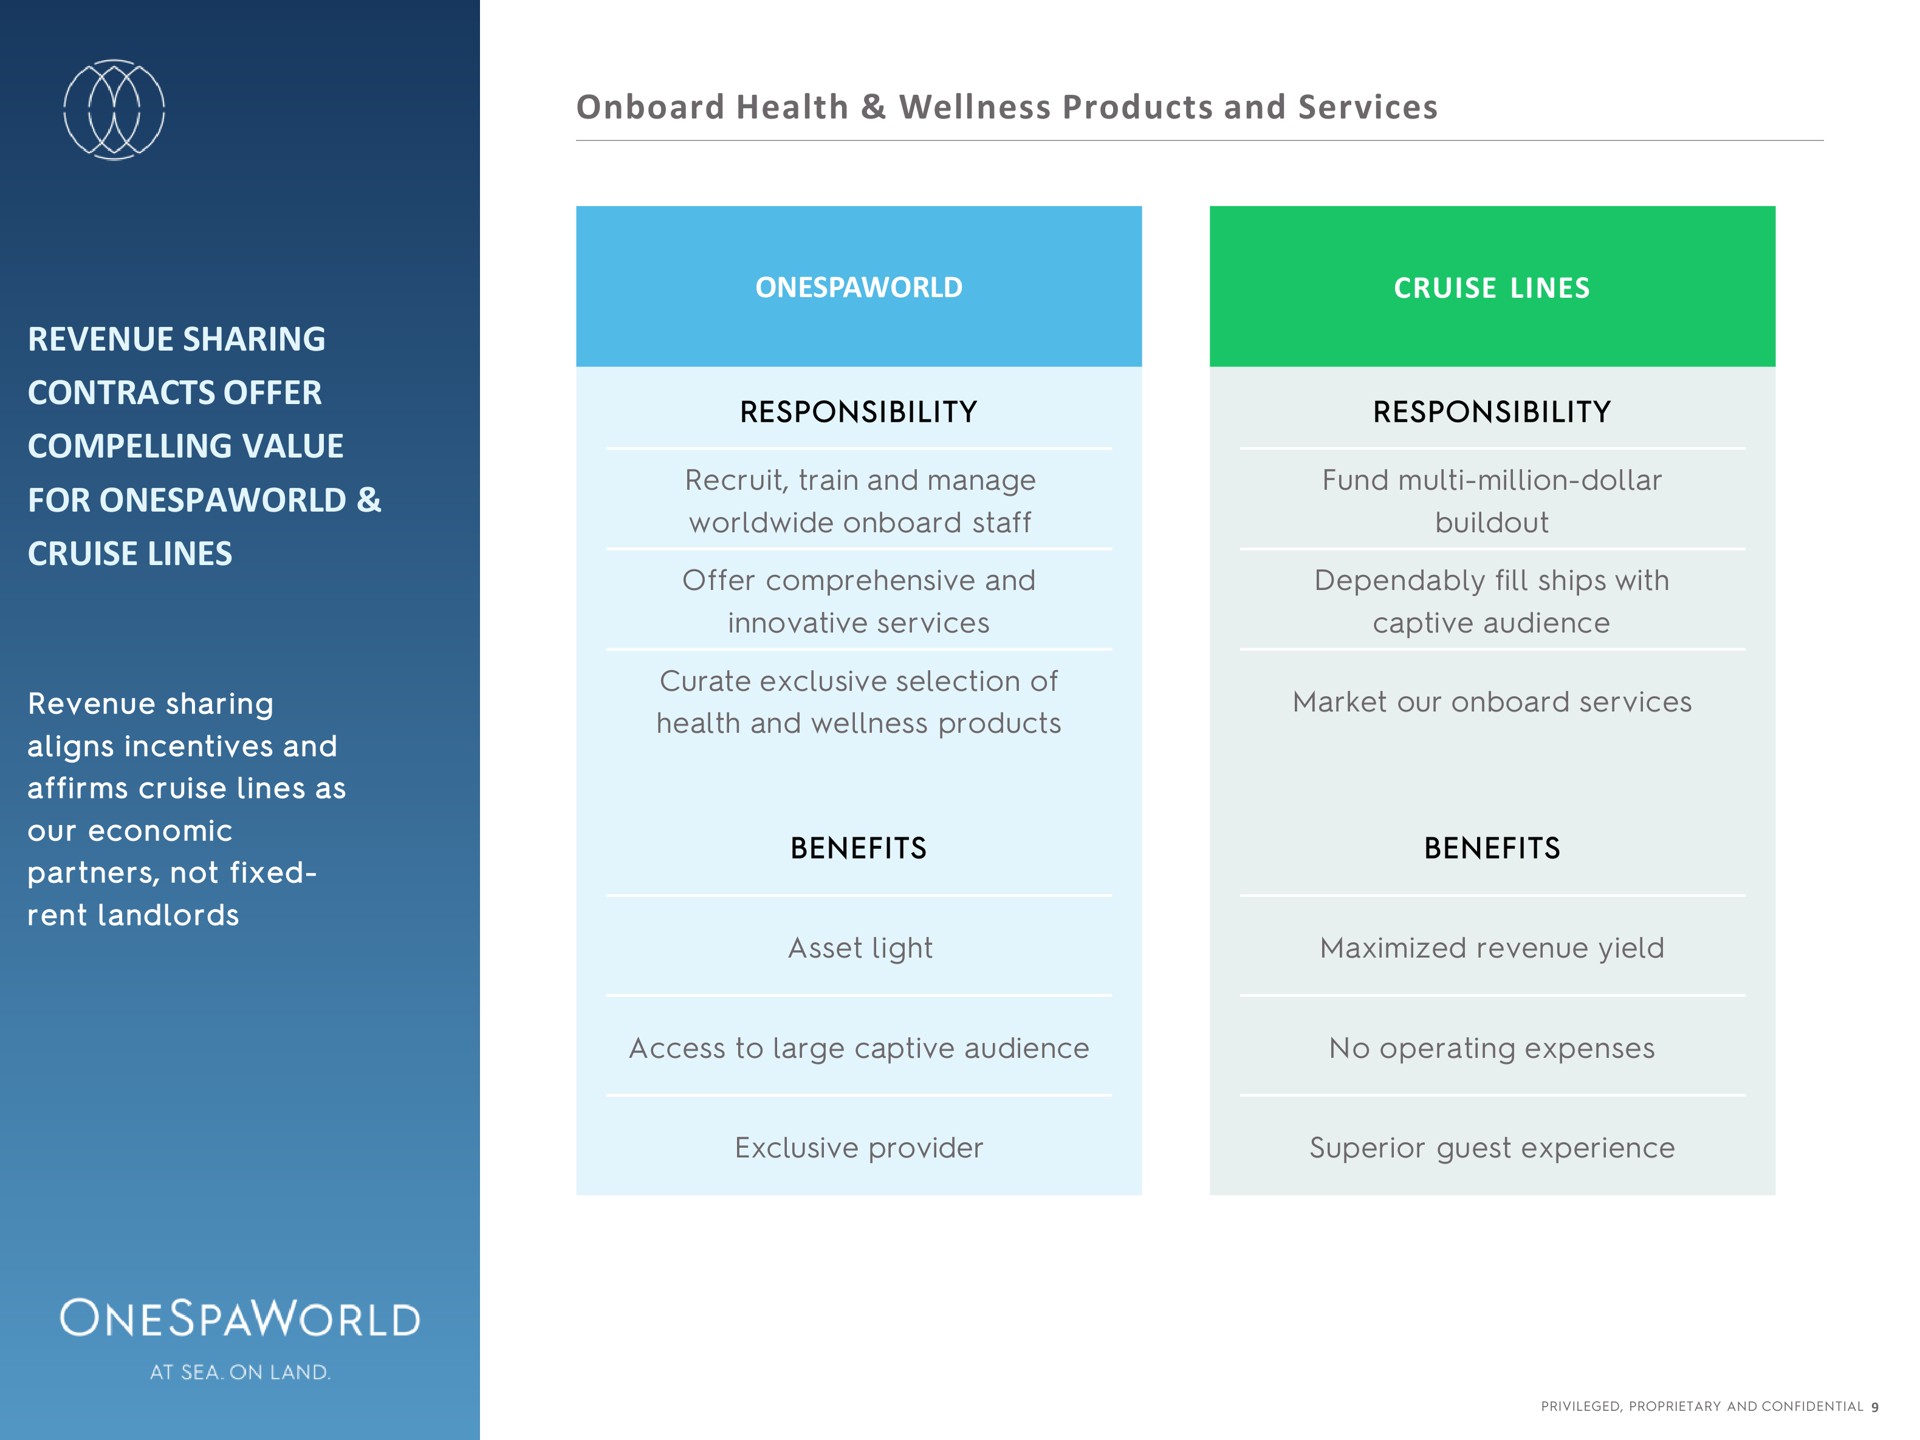 revenue sharing contracts offer compelling value for cruise lines health wellness products and services cruise lines responsibility responsibility benefits benefits aligns incentives | OnesSpaWorld